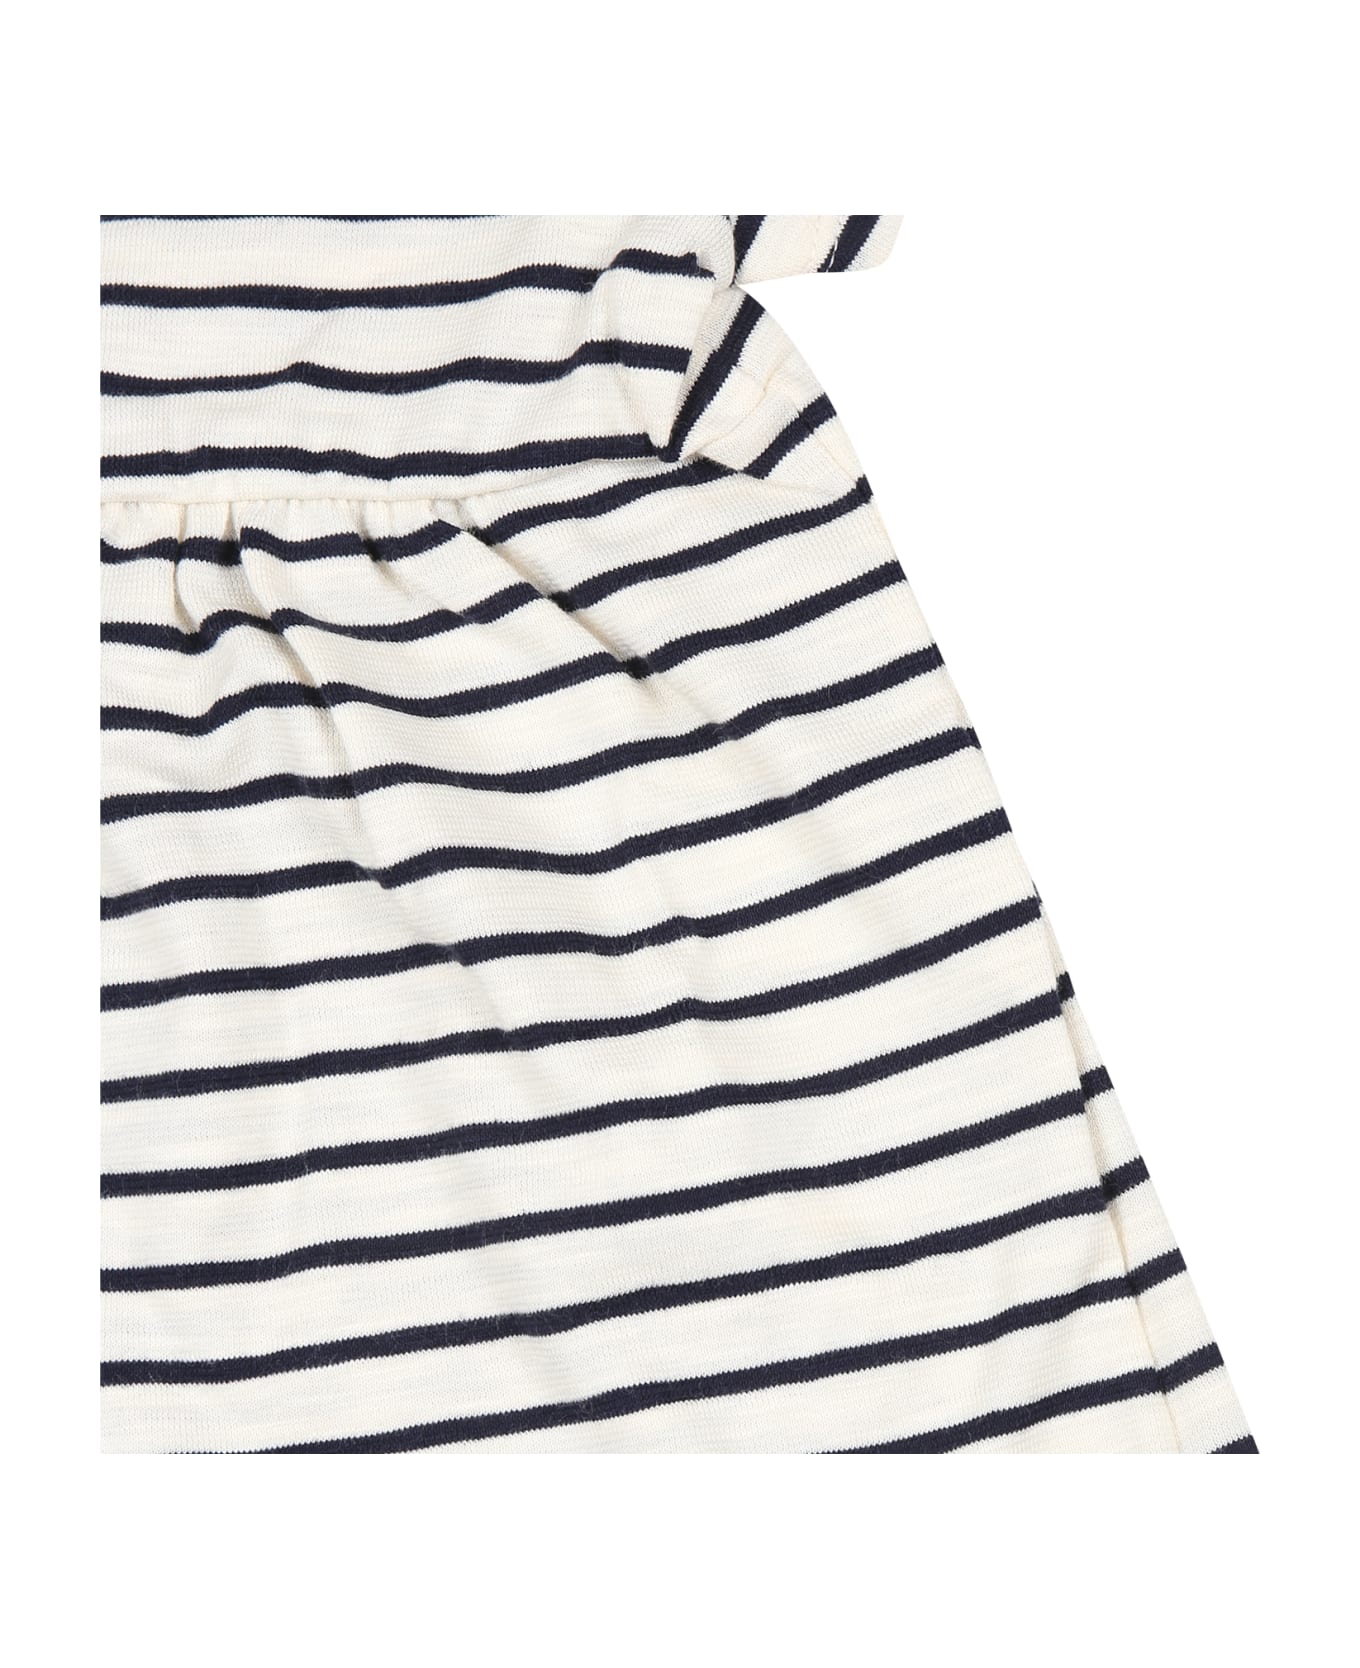 Petit Bateau Ivory Dress For Baby Girl With Blue Stripes - White ウェア